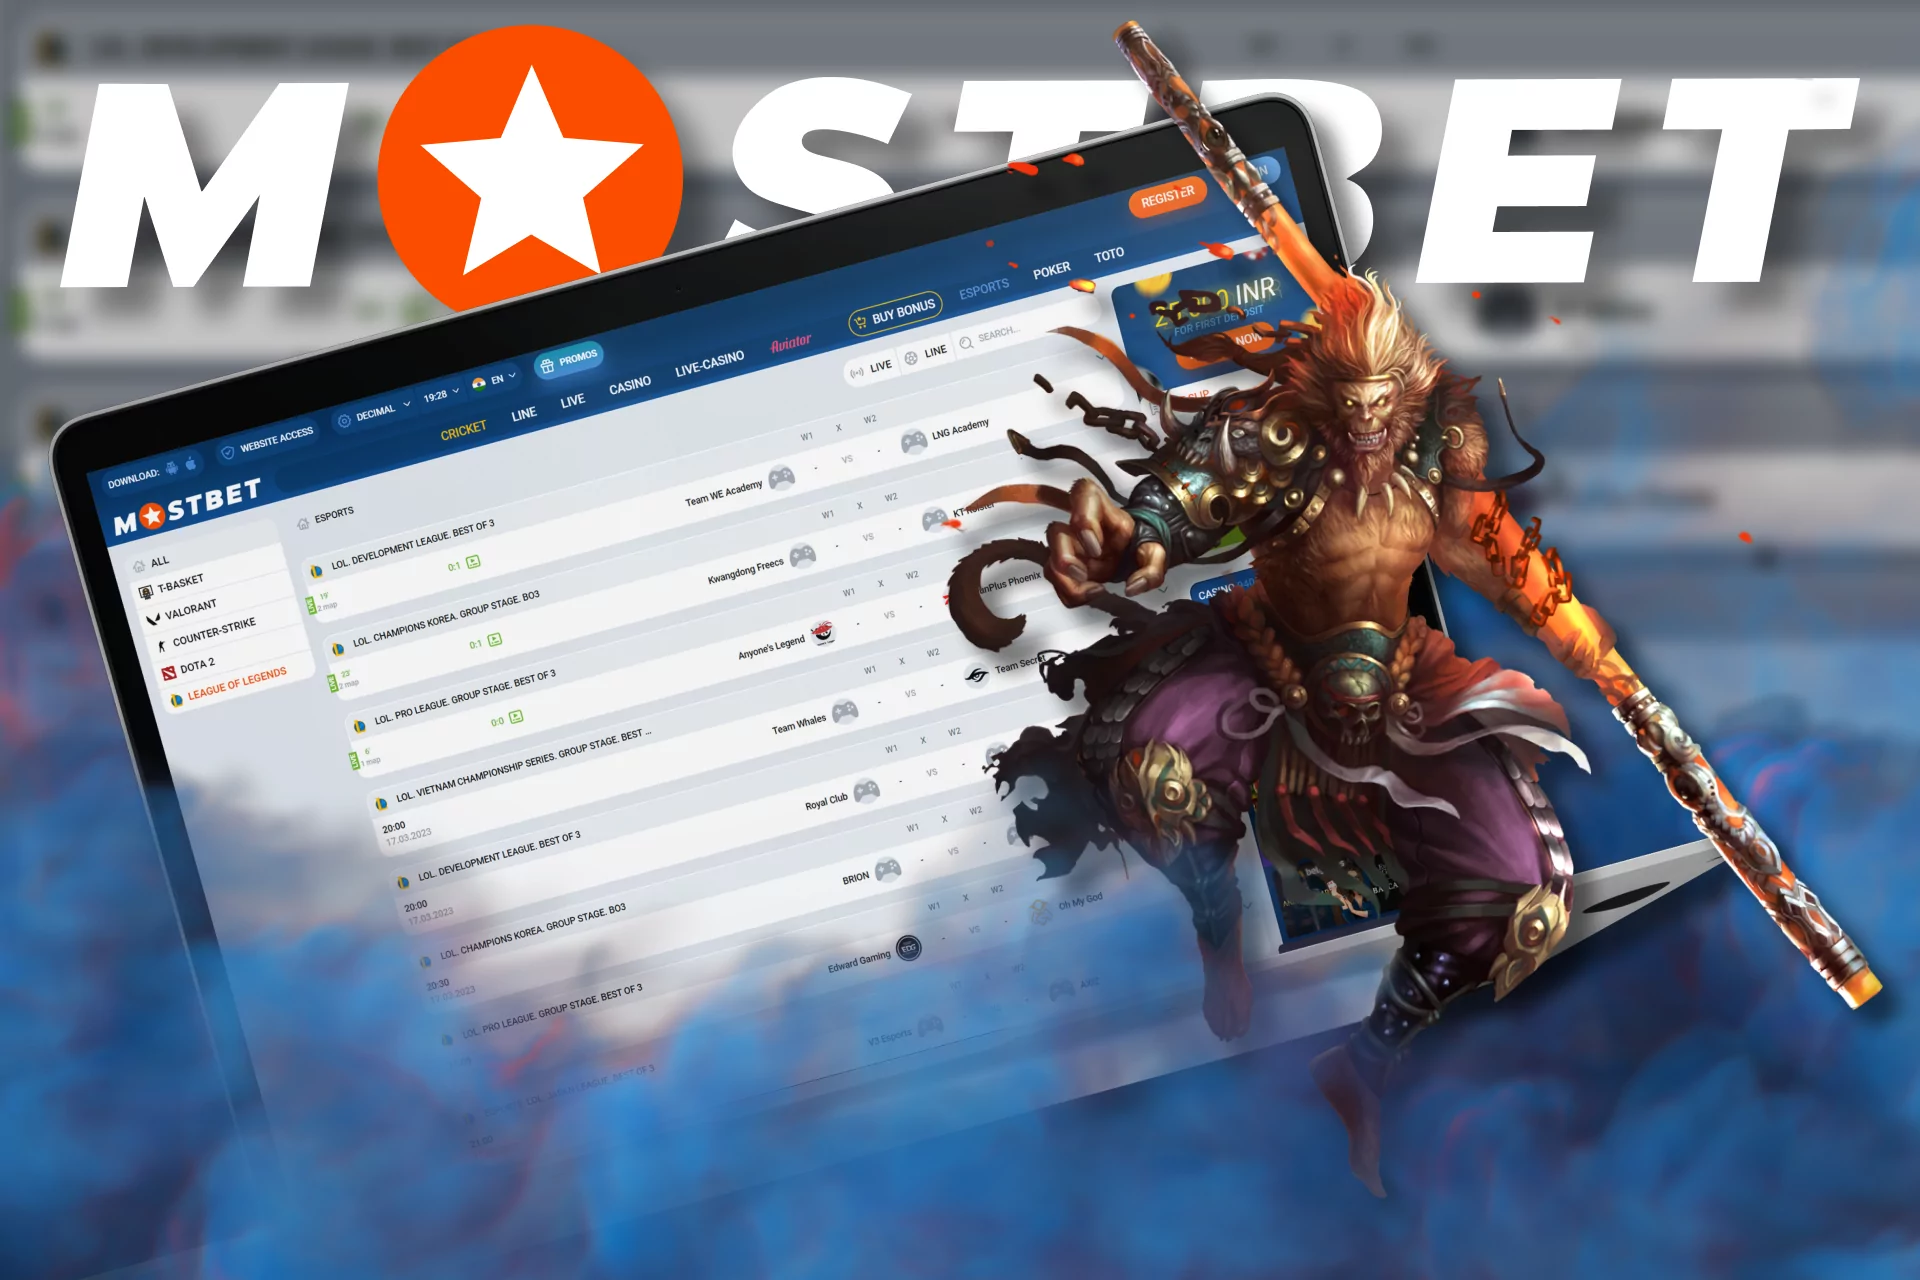 At Mostbet, bet on tournaments in the League of Legends.